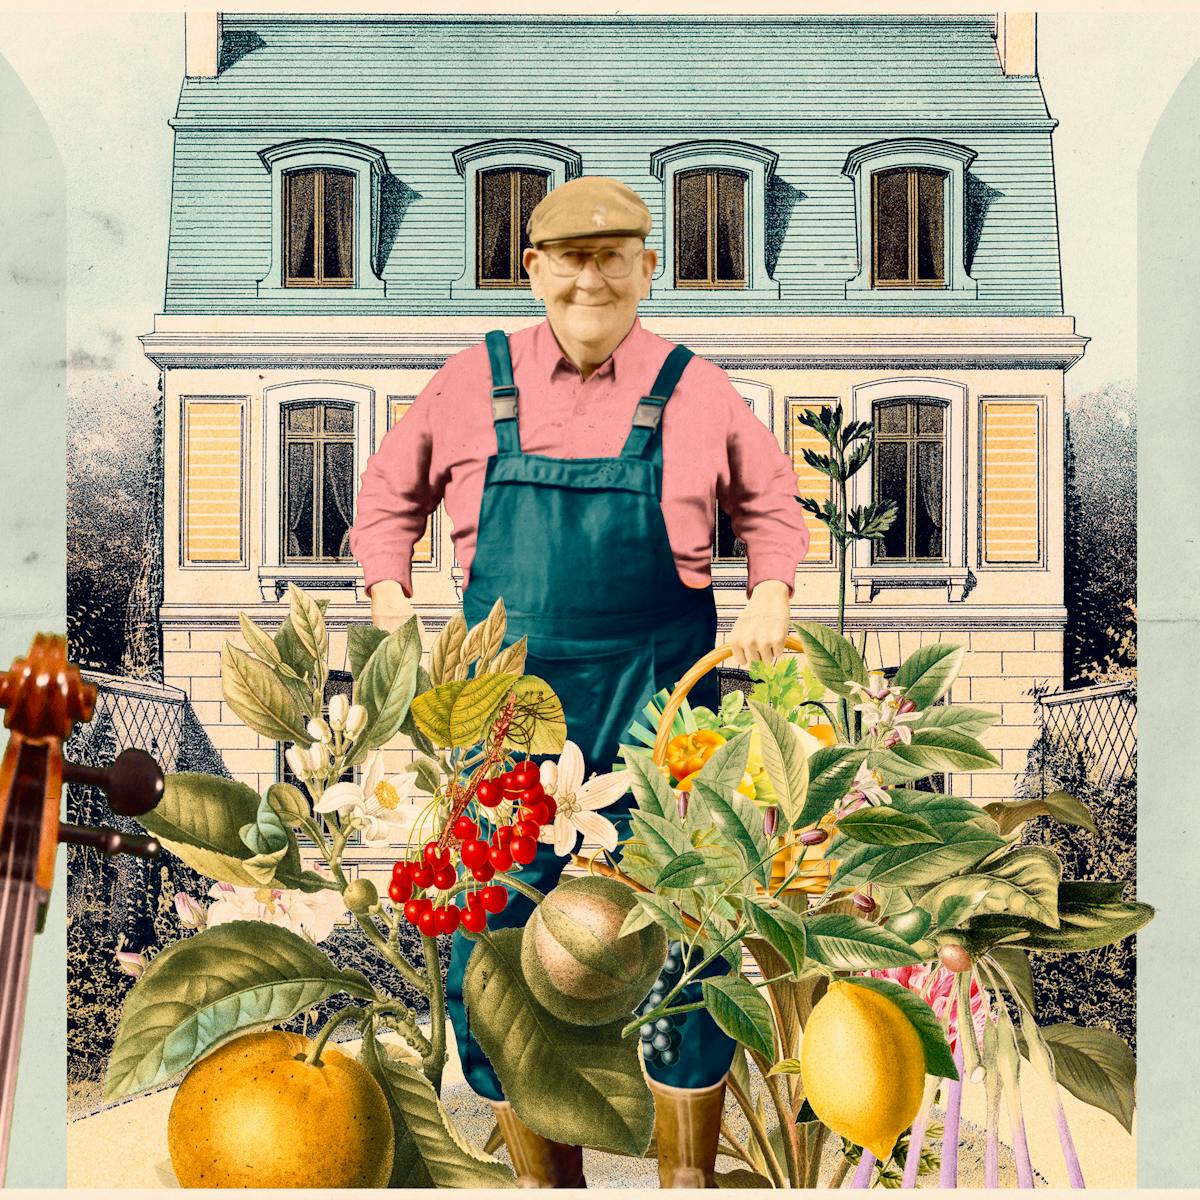 Mixed media digital artwork combining found imagery from vintage magazines and books with painted and textured elements. The overall hues are light blues, pinks, creams, greens and yellows. At the centre of the artwork is a photograph of an older man wearing glasses in a flat cap, smiling towards the viewer. He is wearing a pair of blue dungarees and a pink long sleeve collared shirt. Below and in front of his legs is a great collage of fruit and vegetables, flowers and leaves. Behind him in the background is a drawing of 3 storey home. The top floor is in the tiled roof which is tinted blue. To the left of the image is the profile of an older man with grey hair looking down towards the ground, facing the centre of the image. He is pictured from the chest up and is wearing a blue suit jacket, white shirt and a red tie. Behind him is an old illustration of a grand library room with large bookshelf and old furniture. In front of his nose is the neck and pegbox of a stringed instrument, probably a cello, appearing into view. To the right of the image is the profile of an older man with grey hair looking down towards the ground, facing the centre of the image. He is pictured from the chest up and is wearing a yellow cycling shirt and a cycle helmet with orange lights around the side at the back. Behind him is an illustration of a large mountain scene with rock faces, valley and the buildings in a small village.